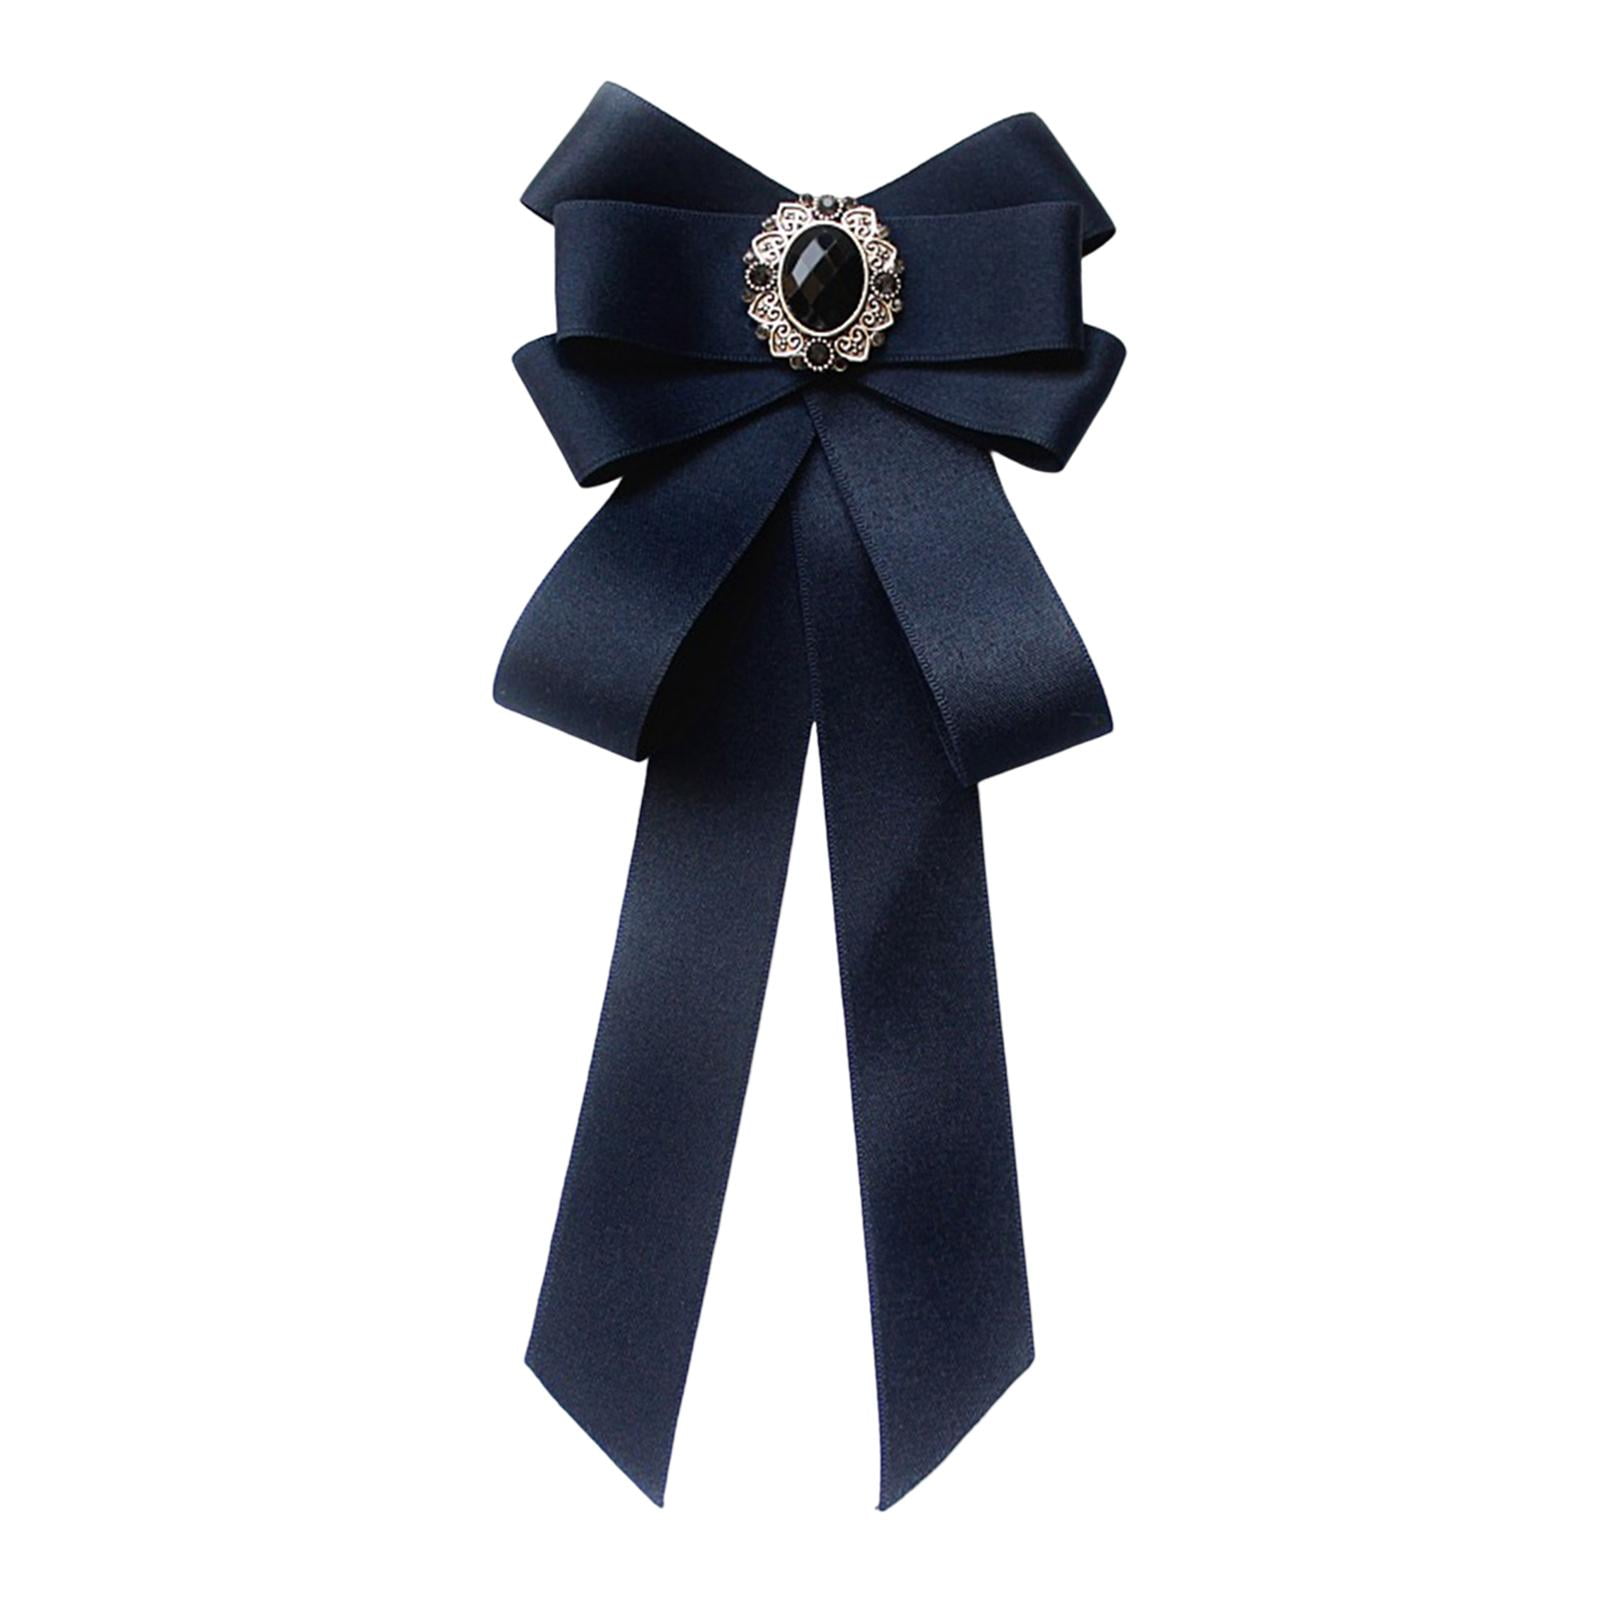 Navy Blue Satin Formal Bow Tie with Silver Rhinestones